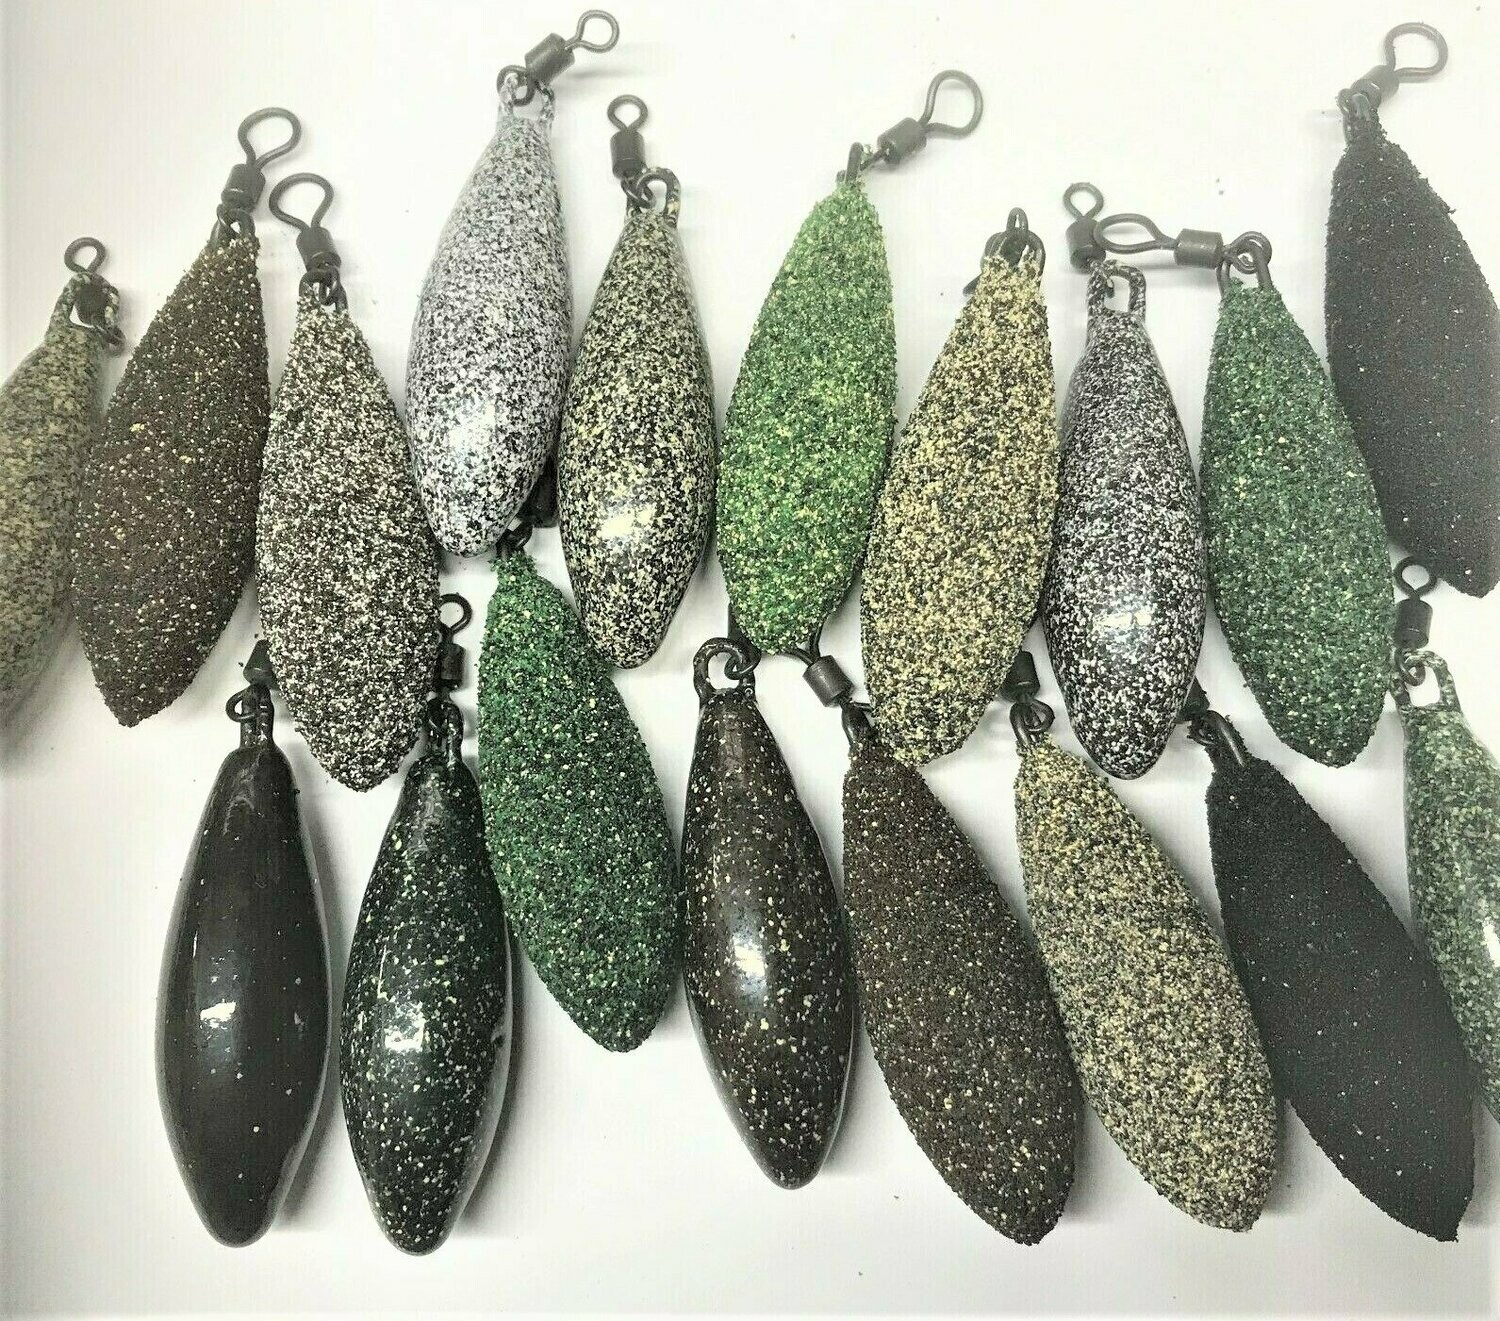 DISTANCE LEAD WEIGHTS SINKERS textured smooth Sea/Carp fishing tackle (sold  in pack of 10) free postage